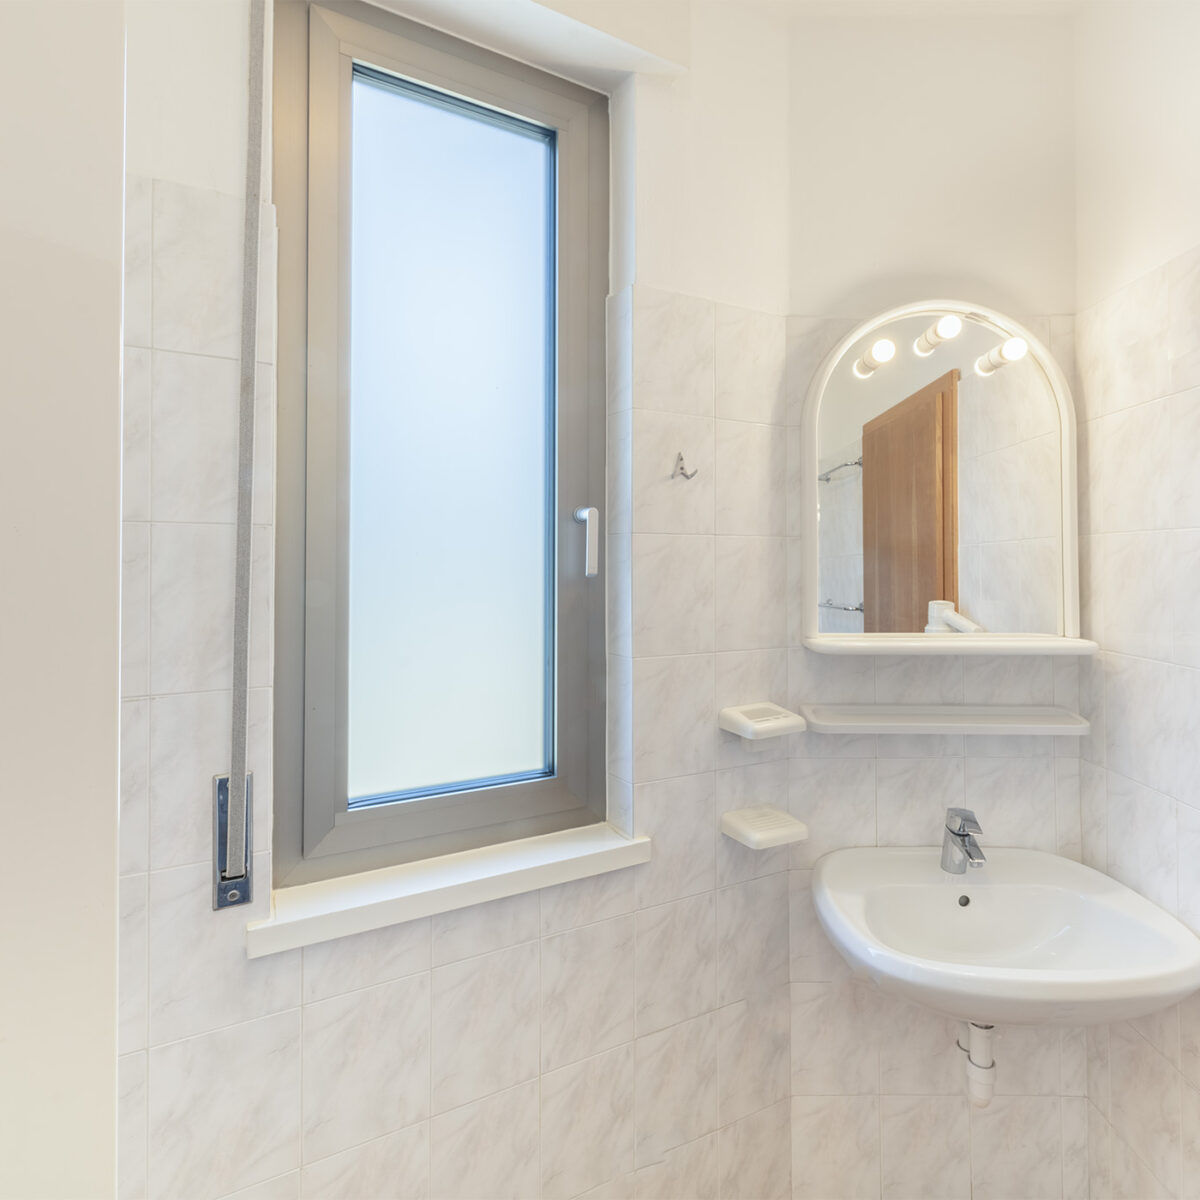 The windowed bathroom is equipped with a shower, toilet, bidet, and a hairdryer.